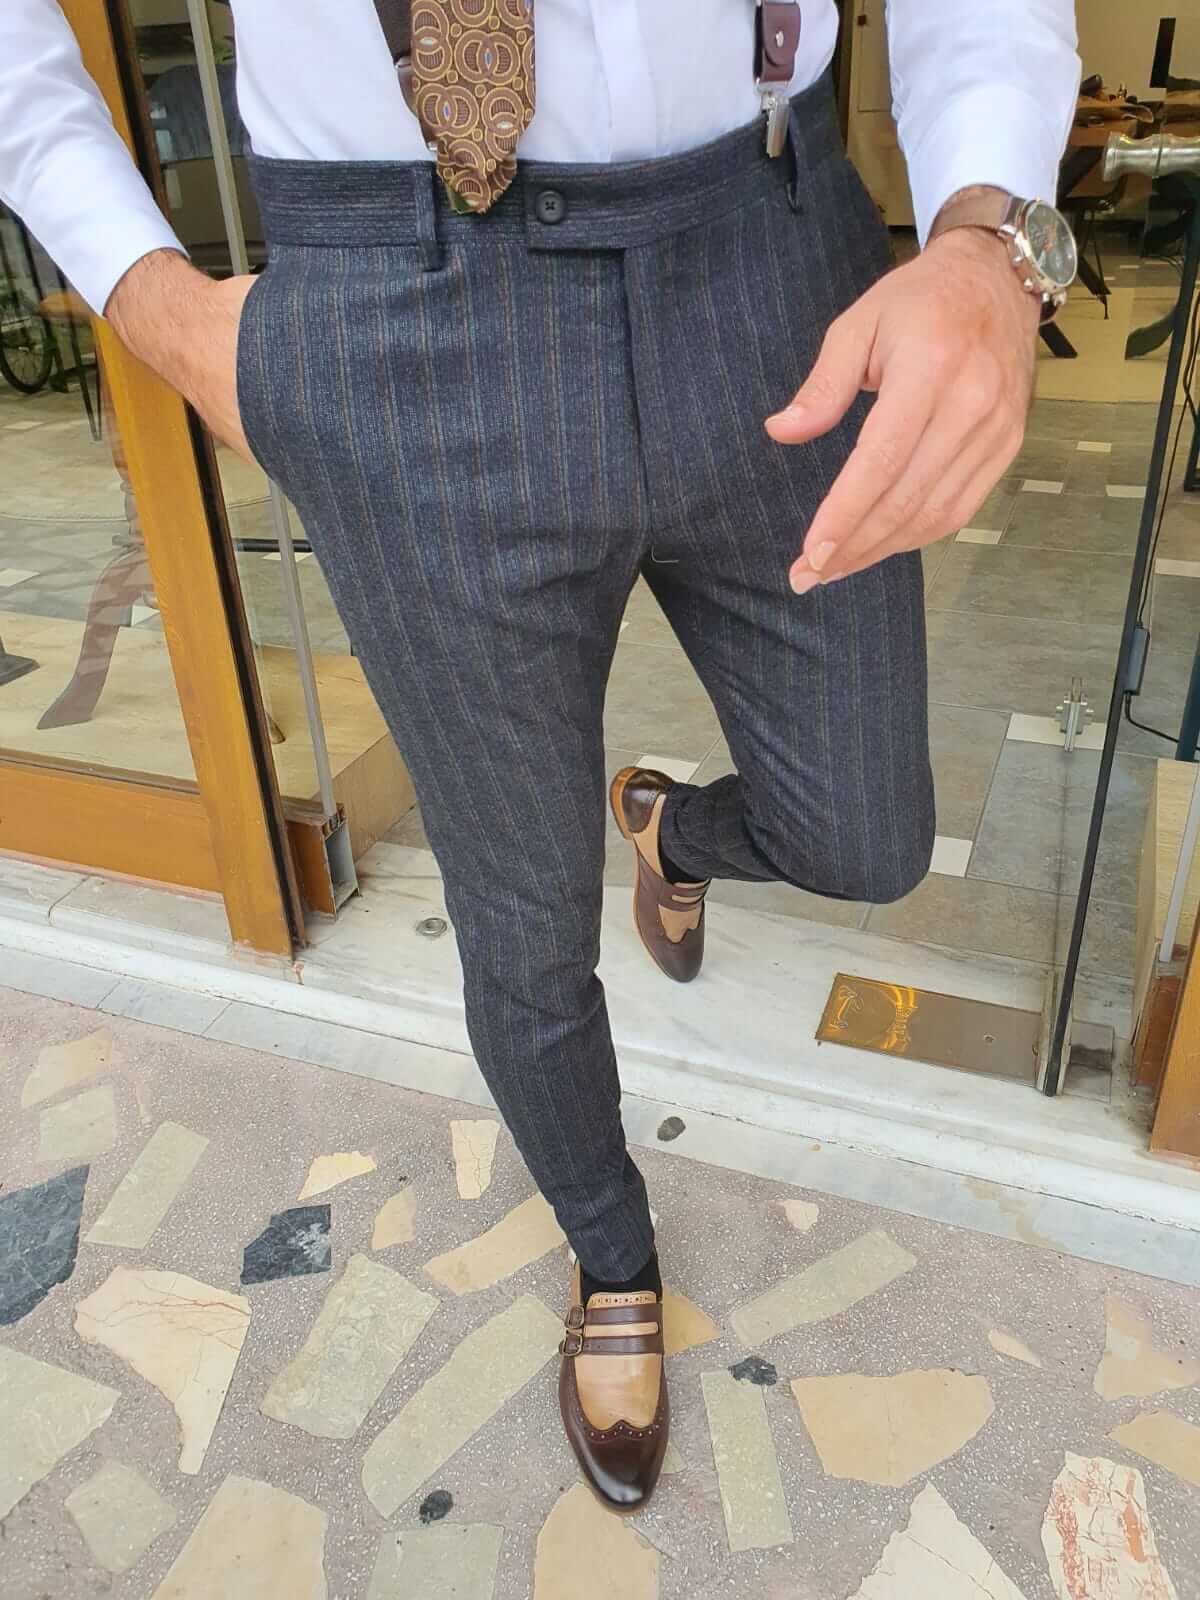 Trendy trousers featuring a sophisticated striped dark blue plaid pattern